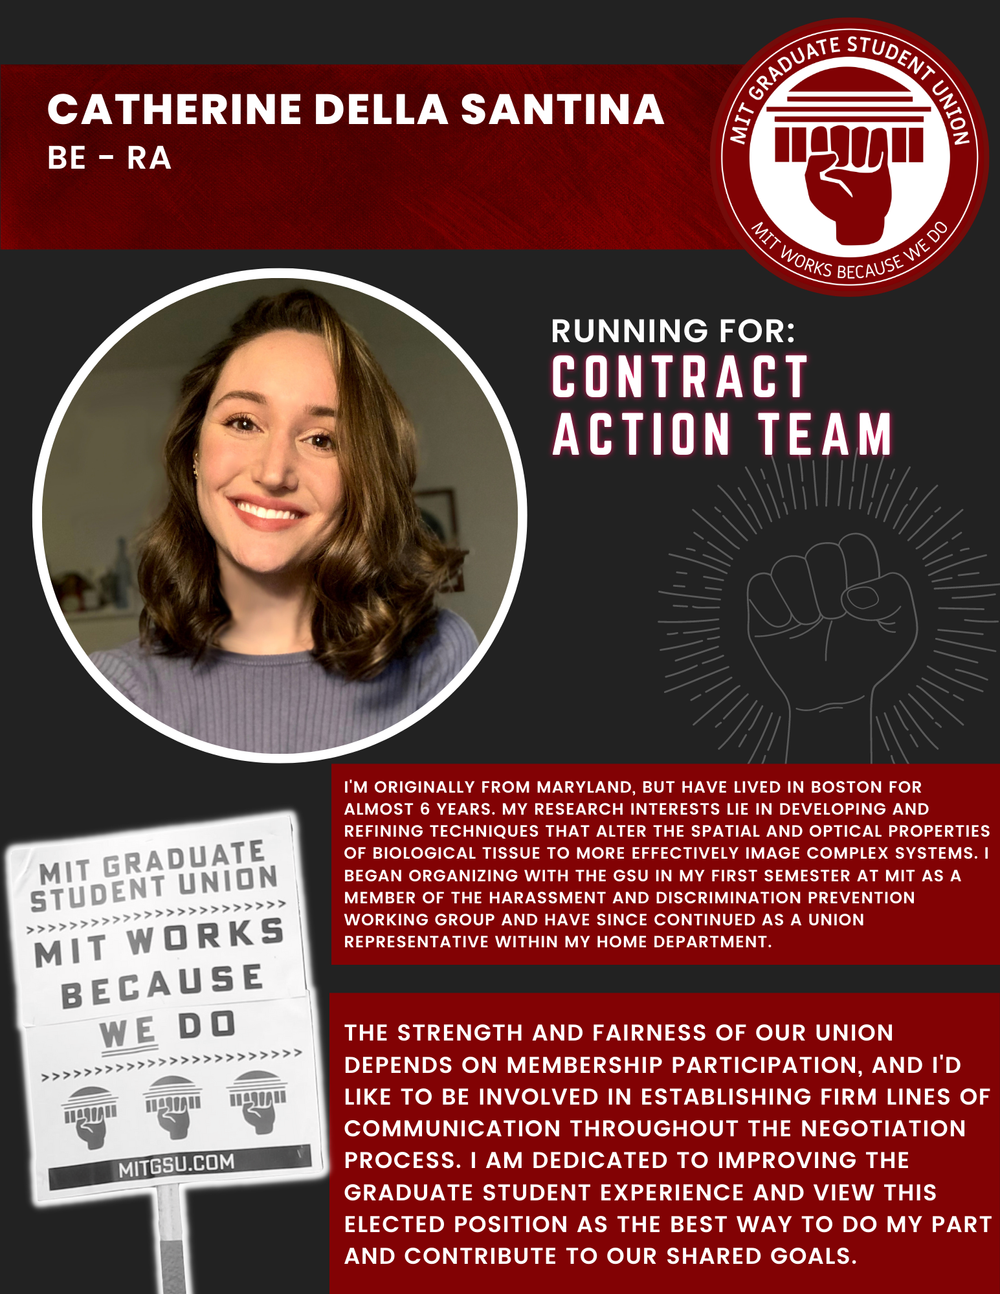  CATHERINE DELLA SANTINA BE - RA   RUNNING FOR: Contract Action Team  I'M ORIGINALLY FROM MARYLAND, BUT HAVE LIVED IN BOSTON FOR ALMOST 6 YEARS. MY RESEARCH INTERESTS LIE IN DEVELOPING AND REFINING TECHNIQUES THAT ALTER THE SPATIAL AND OPTICAL PROPER